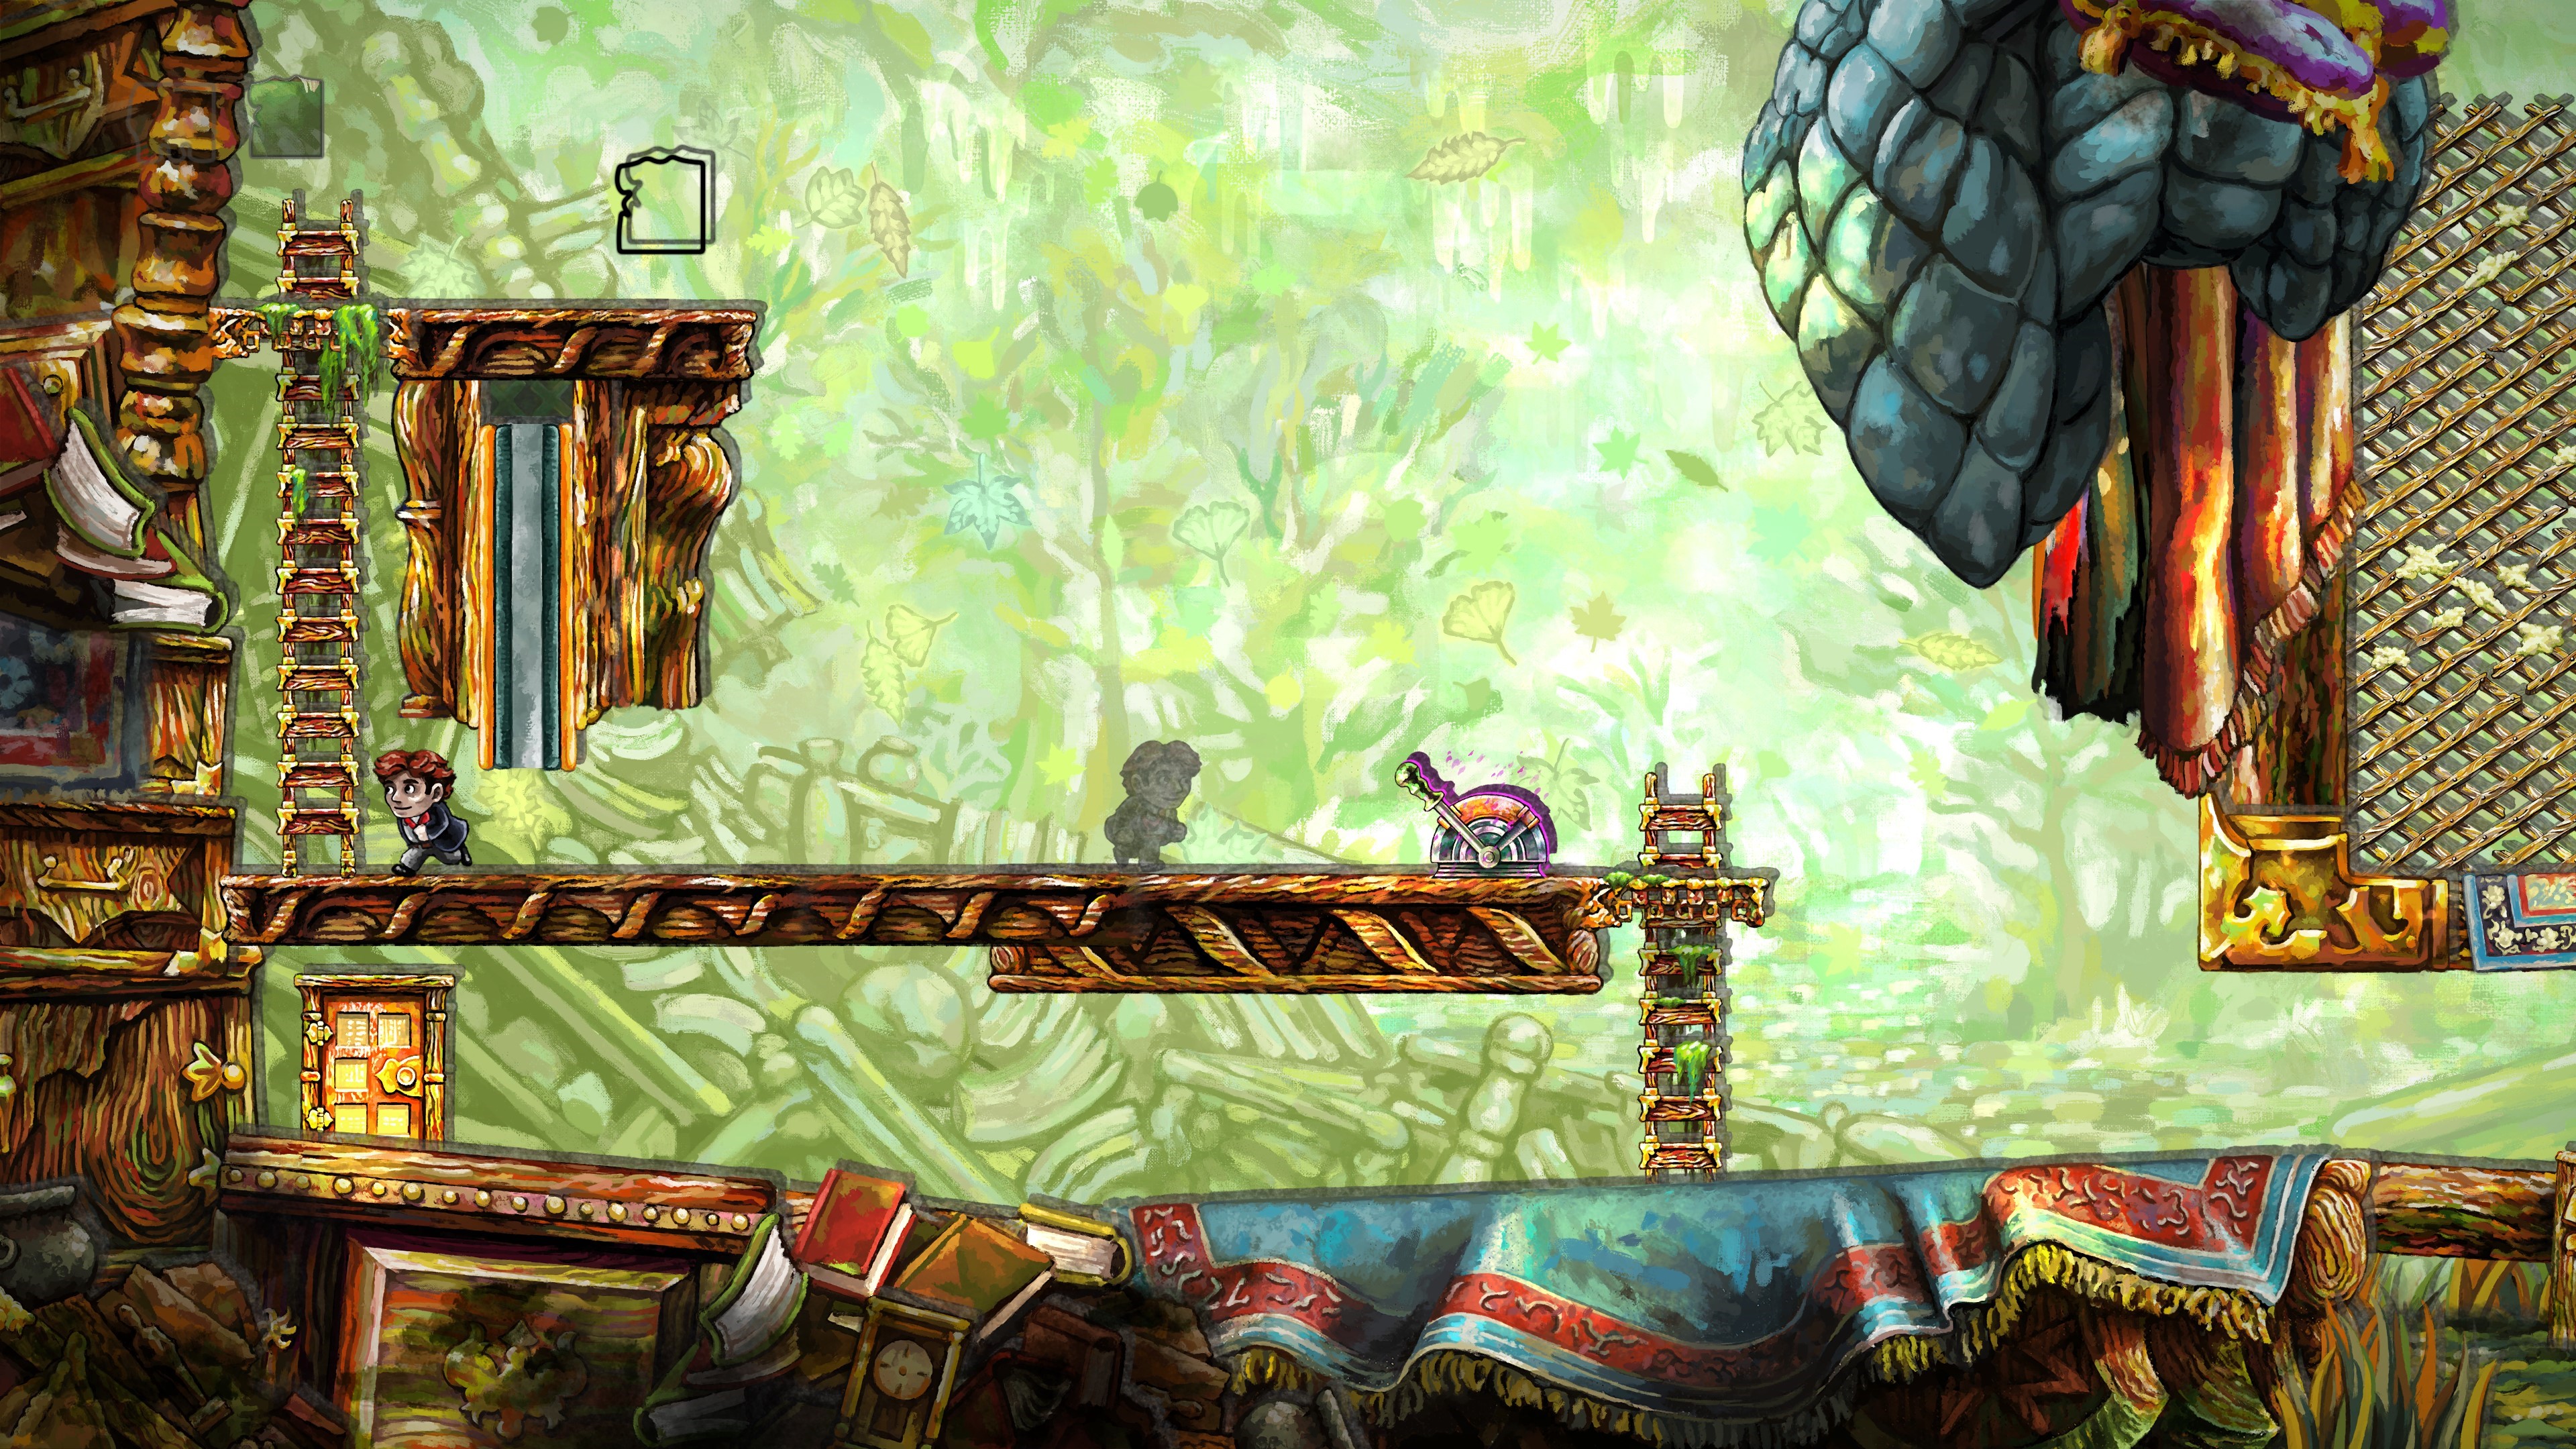 Braid, Anniversary Edition will release on May 14, featuring dozens of redesigned levels and 13 new full puzzles alongside developer commentary.